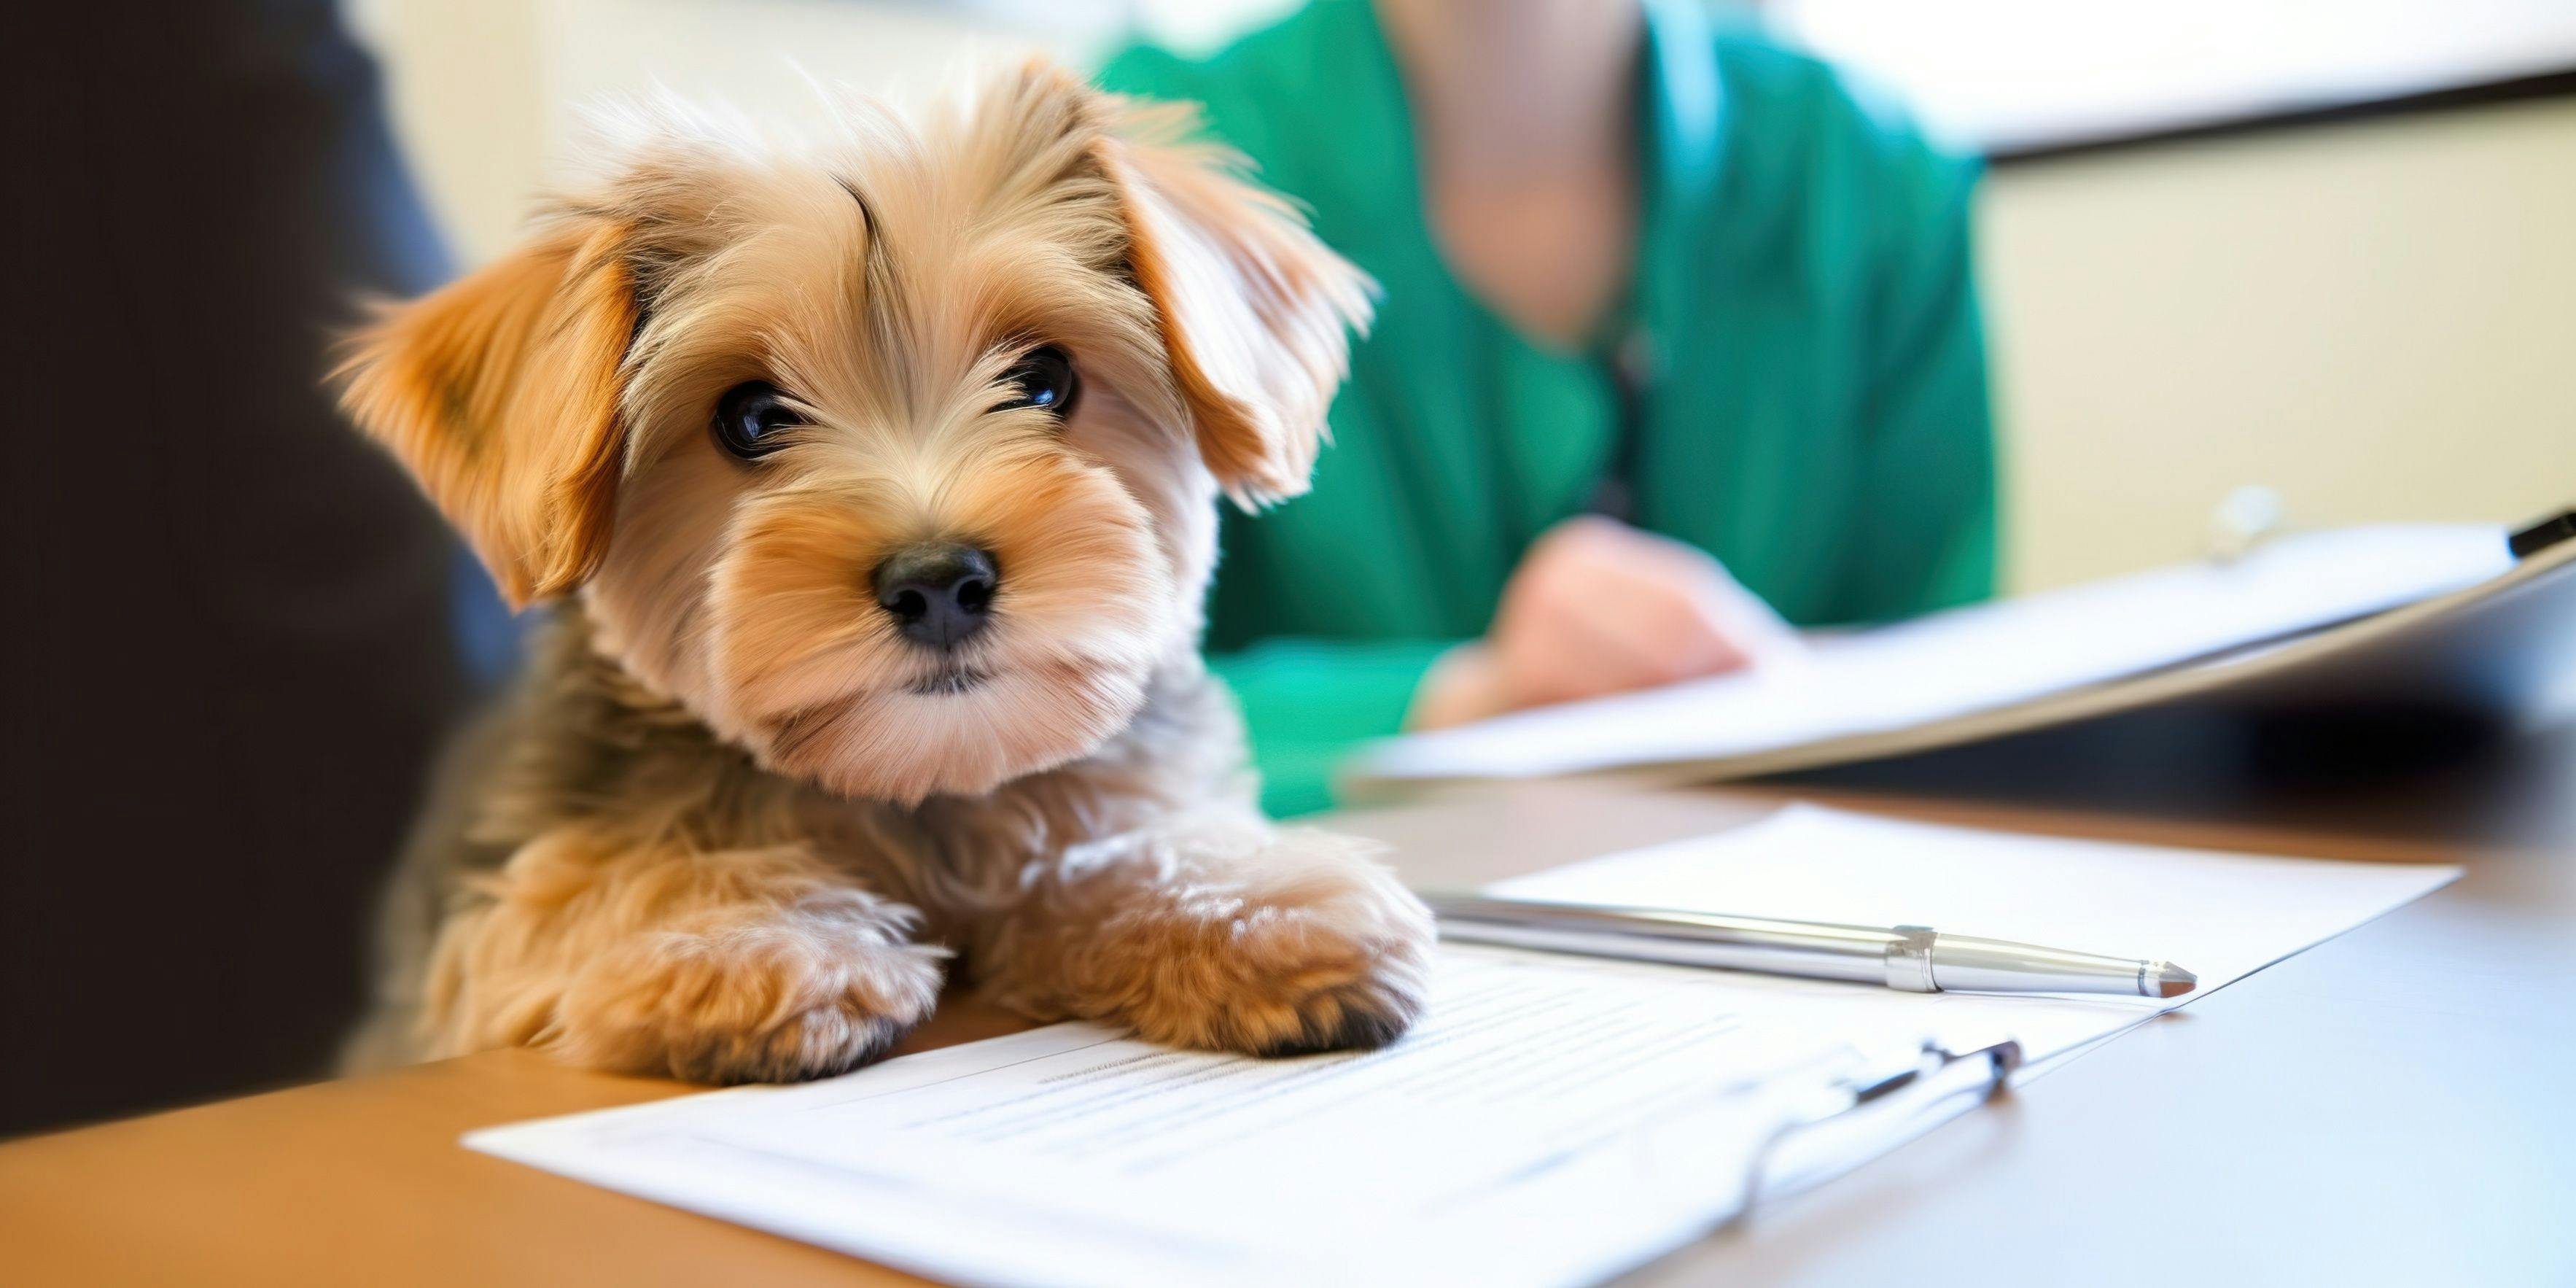 7 pet insurance strategies can help your clients and grow your practice